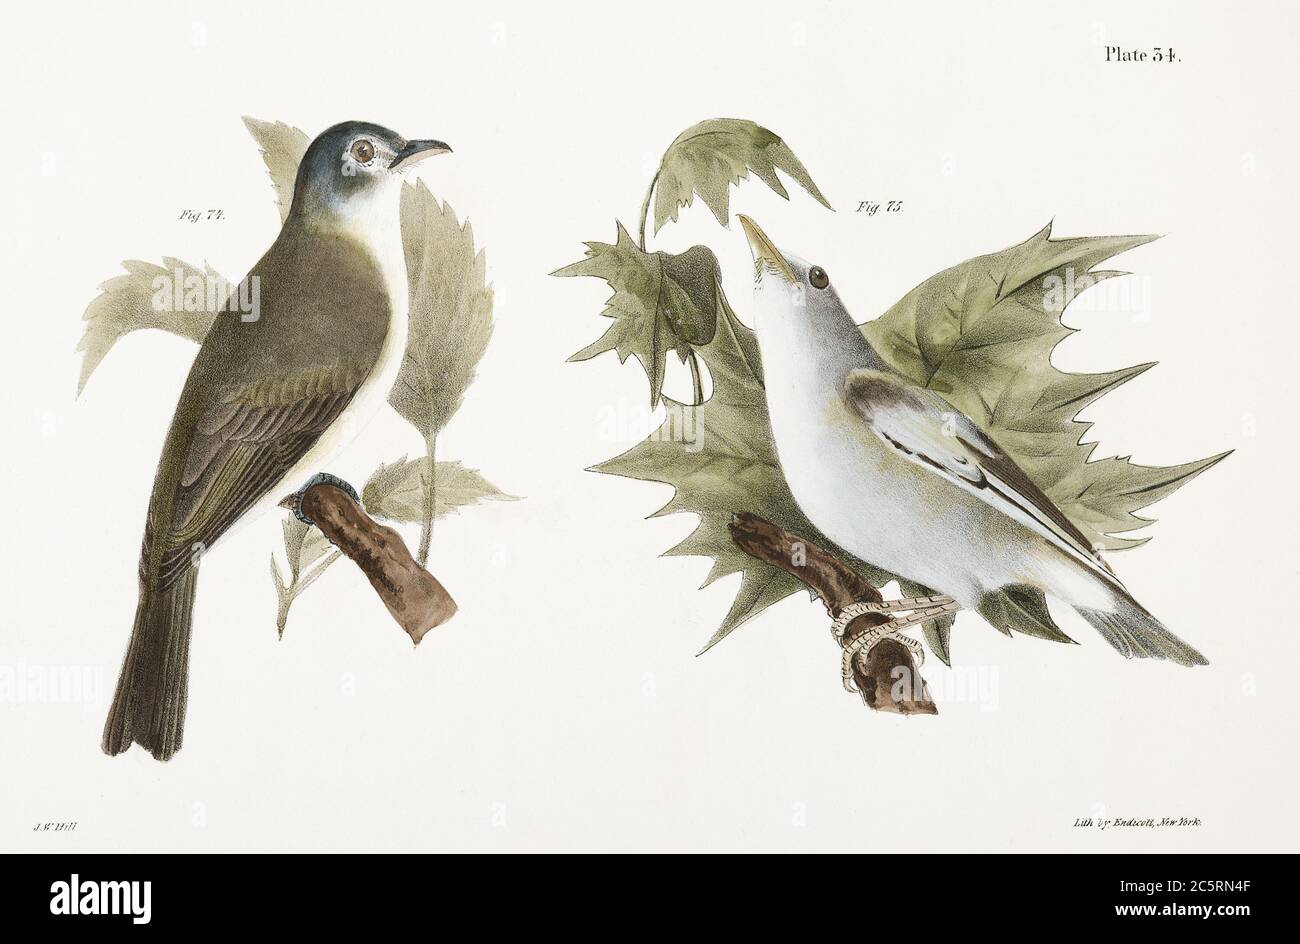 The Warblink Greenlet (Vireo gilvus) 75. The Red-eyed Greenlet (Vireo olivaceus) illustration from Zoology of Ne.jpg - 2C5RN4F Stock Photo